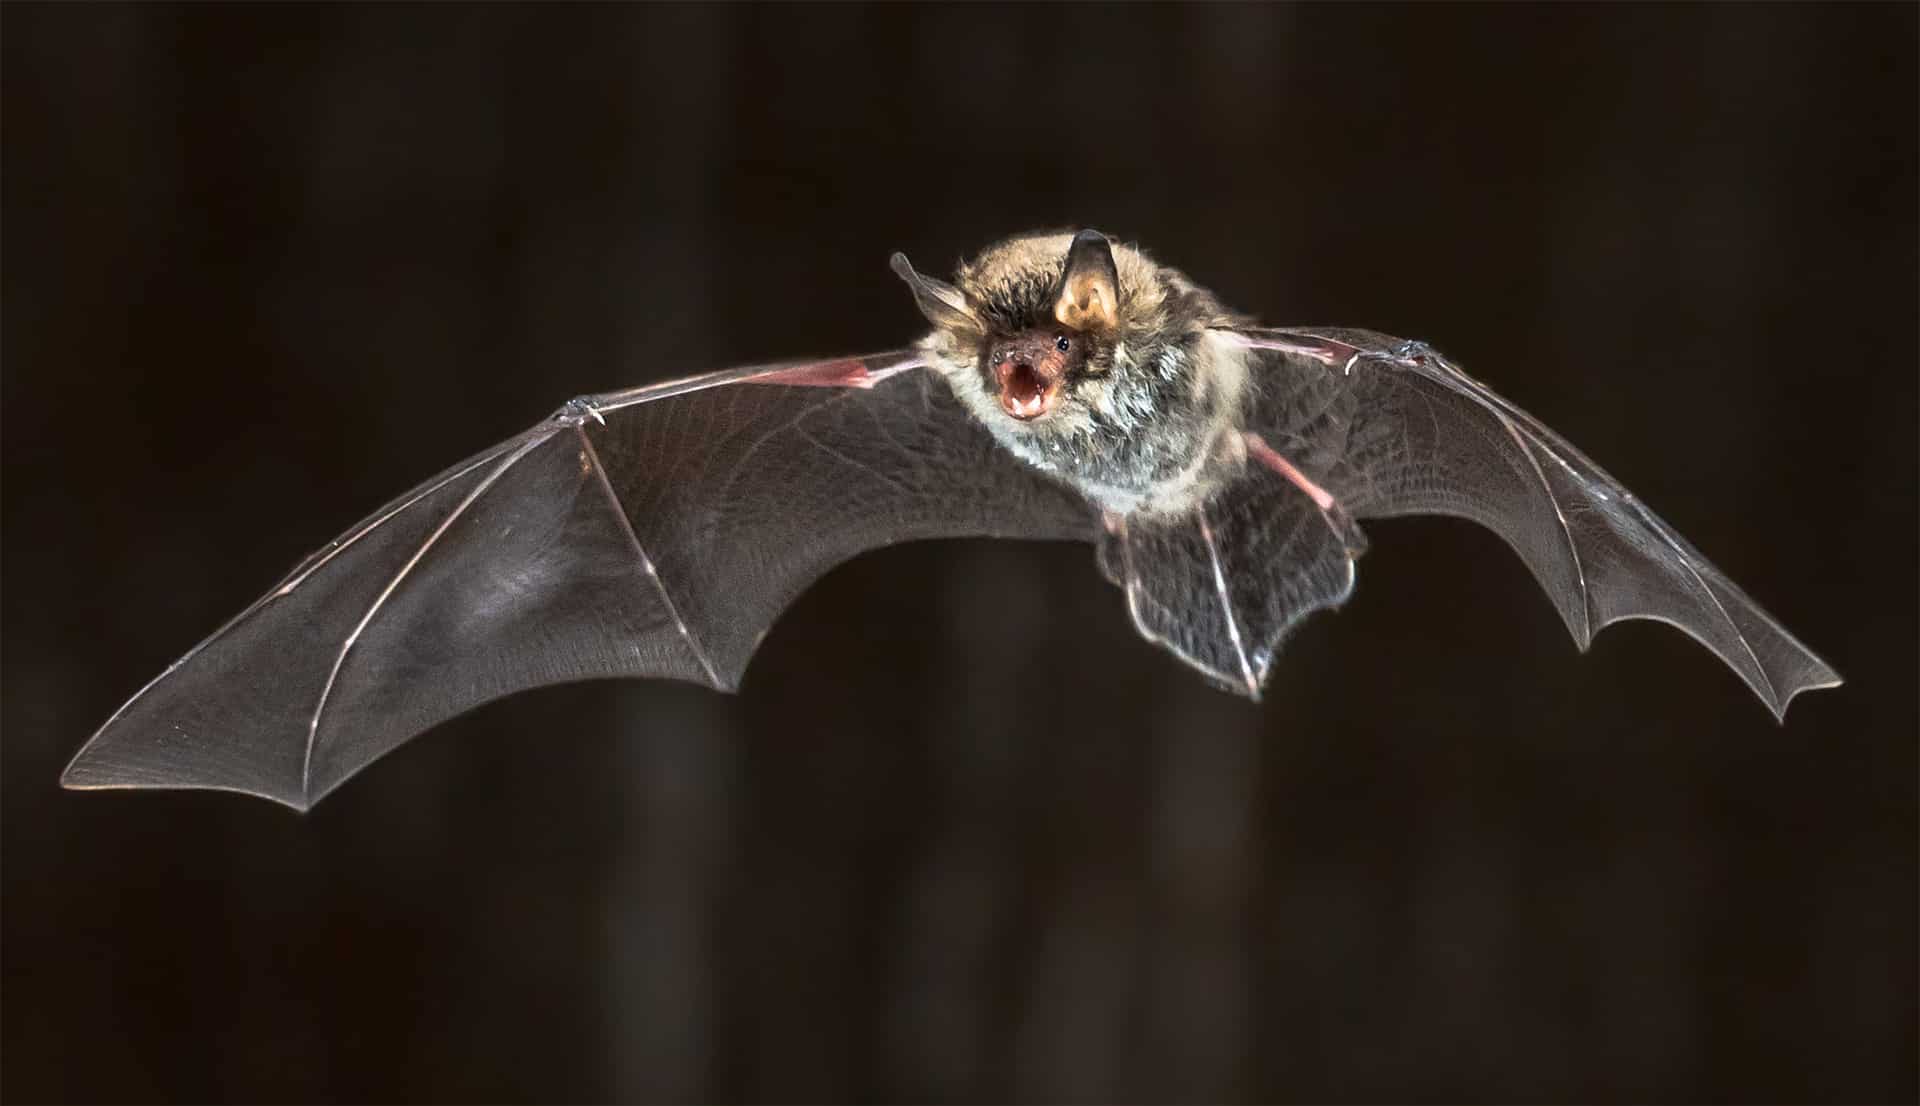 Bat flying at night, well lit by camera flash.